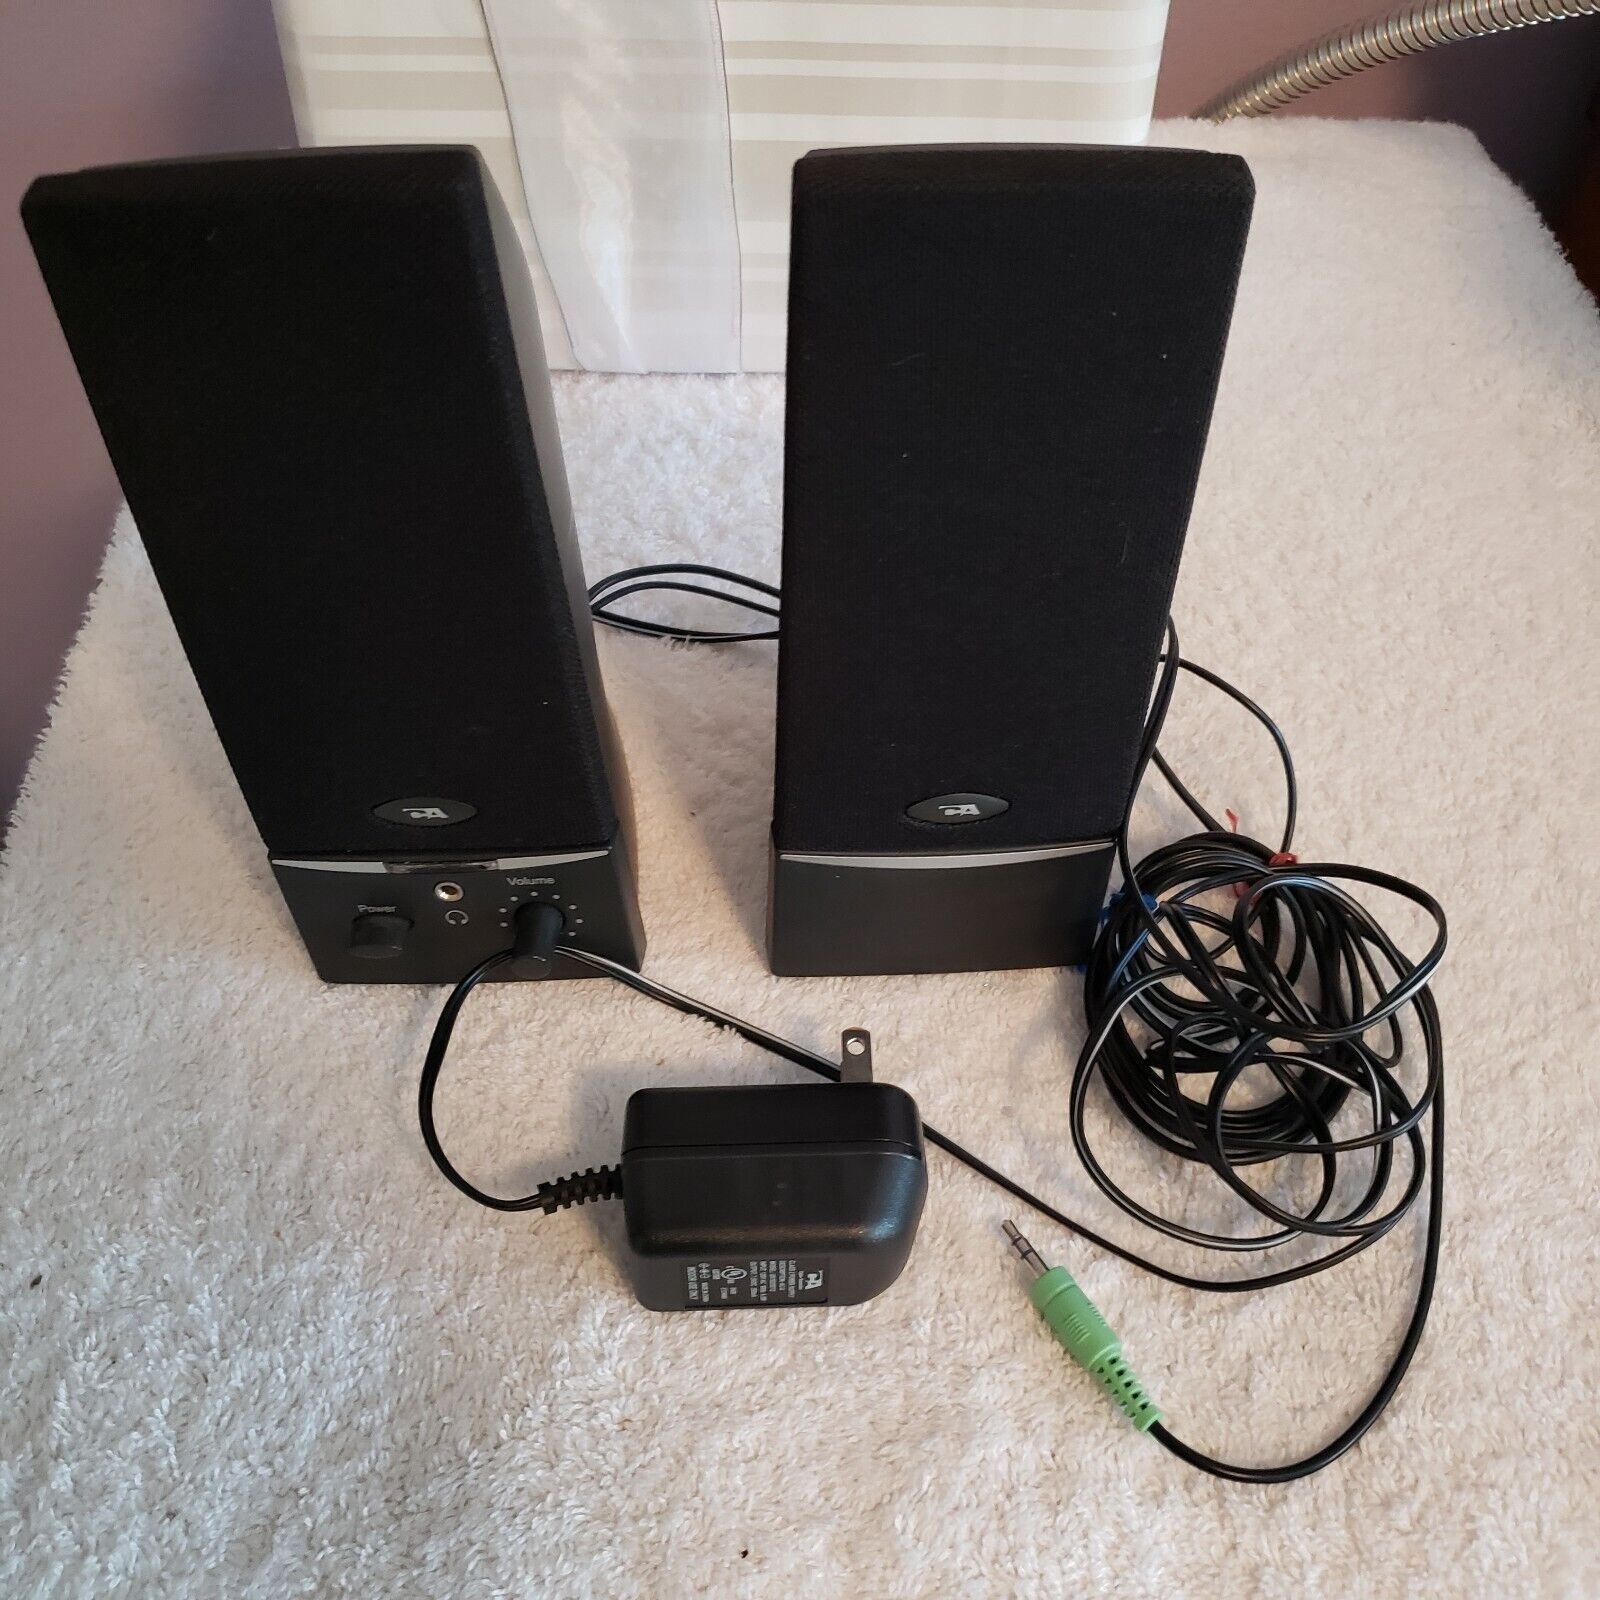 Cyber Acoustics Desktop / Laptop Speakers - wired - Tested - with Volume Control